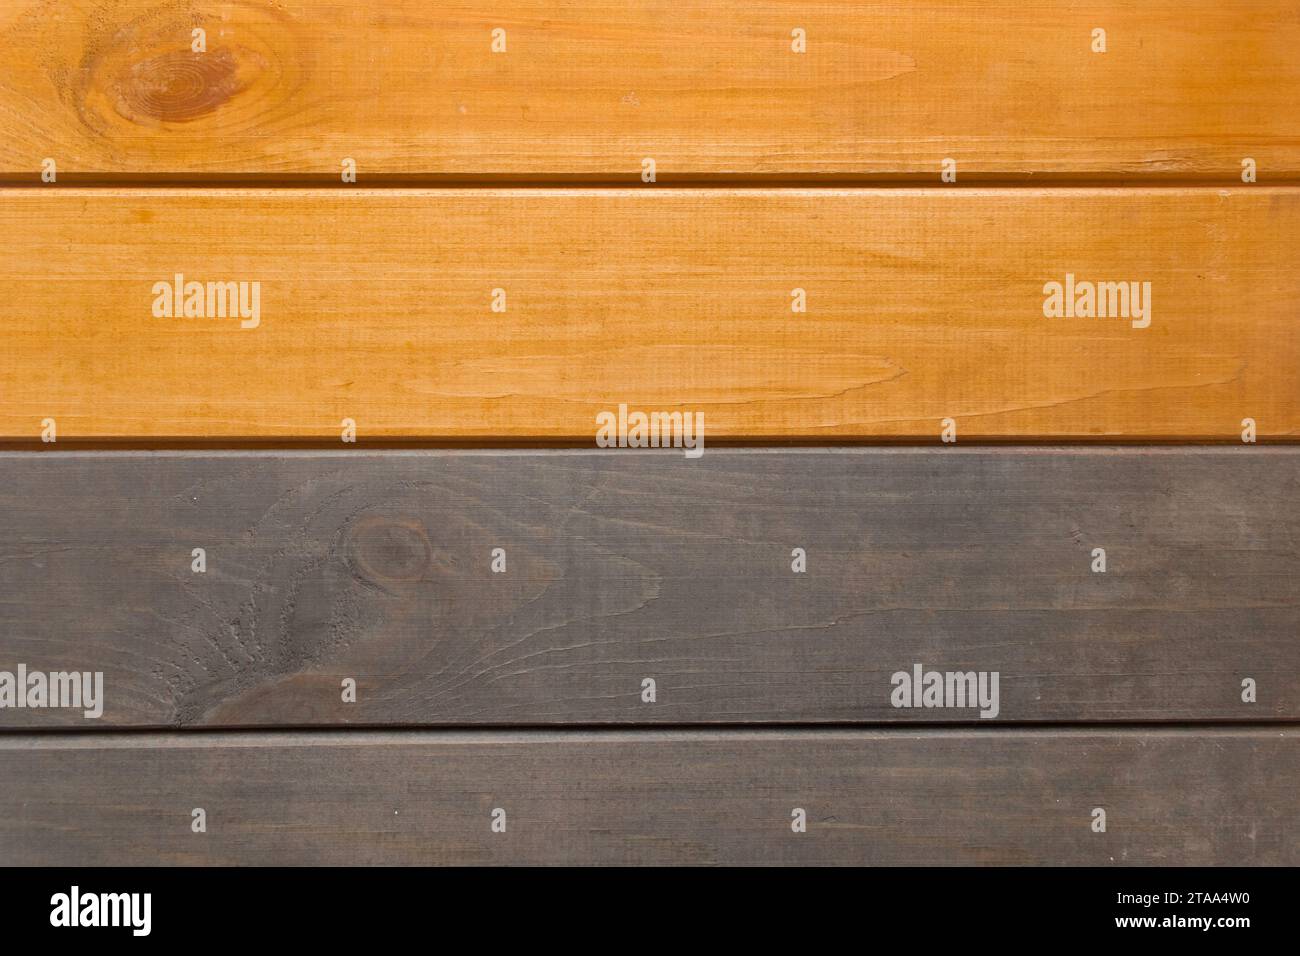 Wooden Horizontal Lines Stripes Planks Surface Two 2 Colors Orange Grey Paint Texture Background. Stock Photo